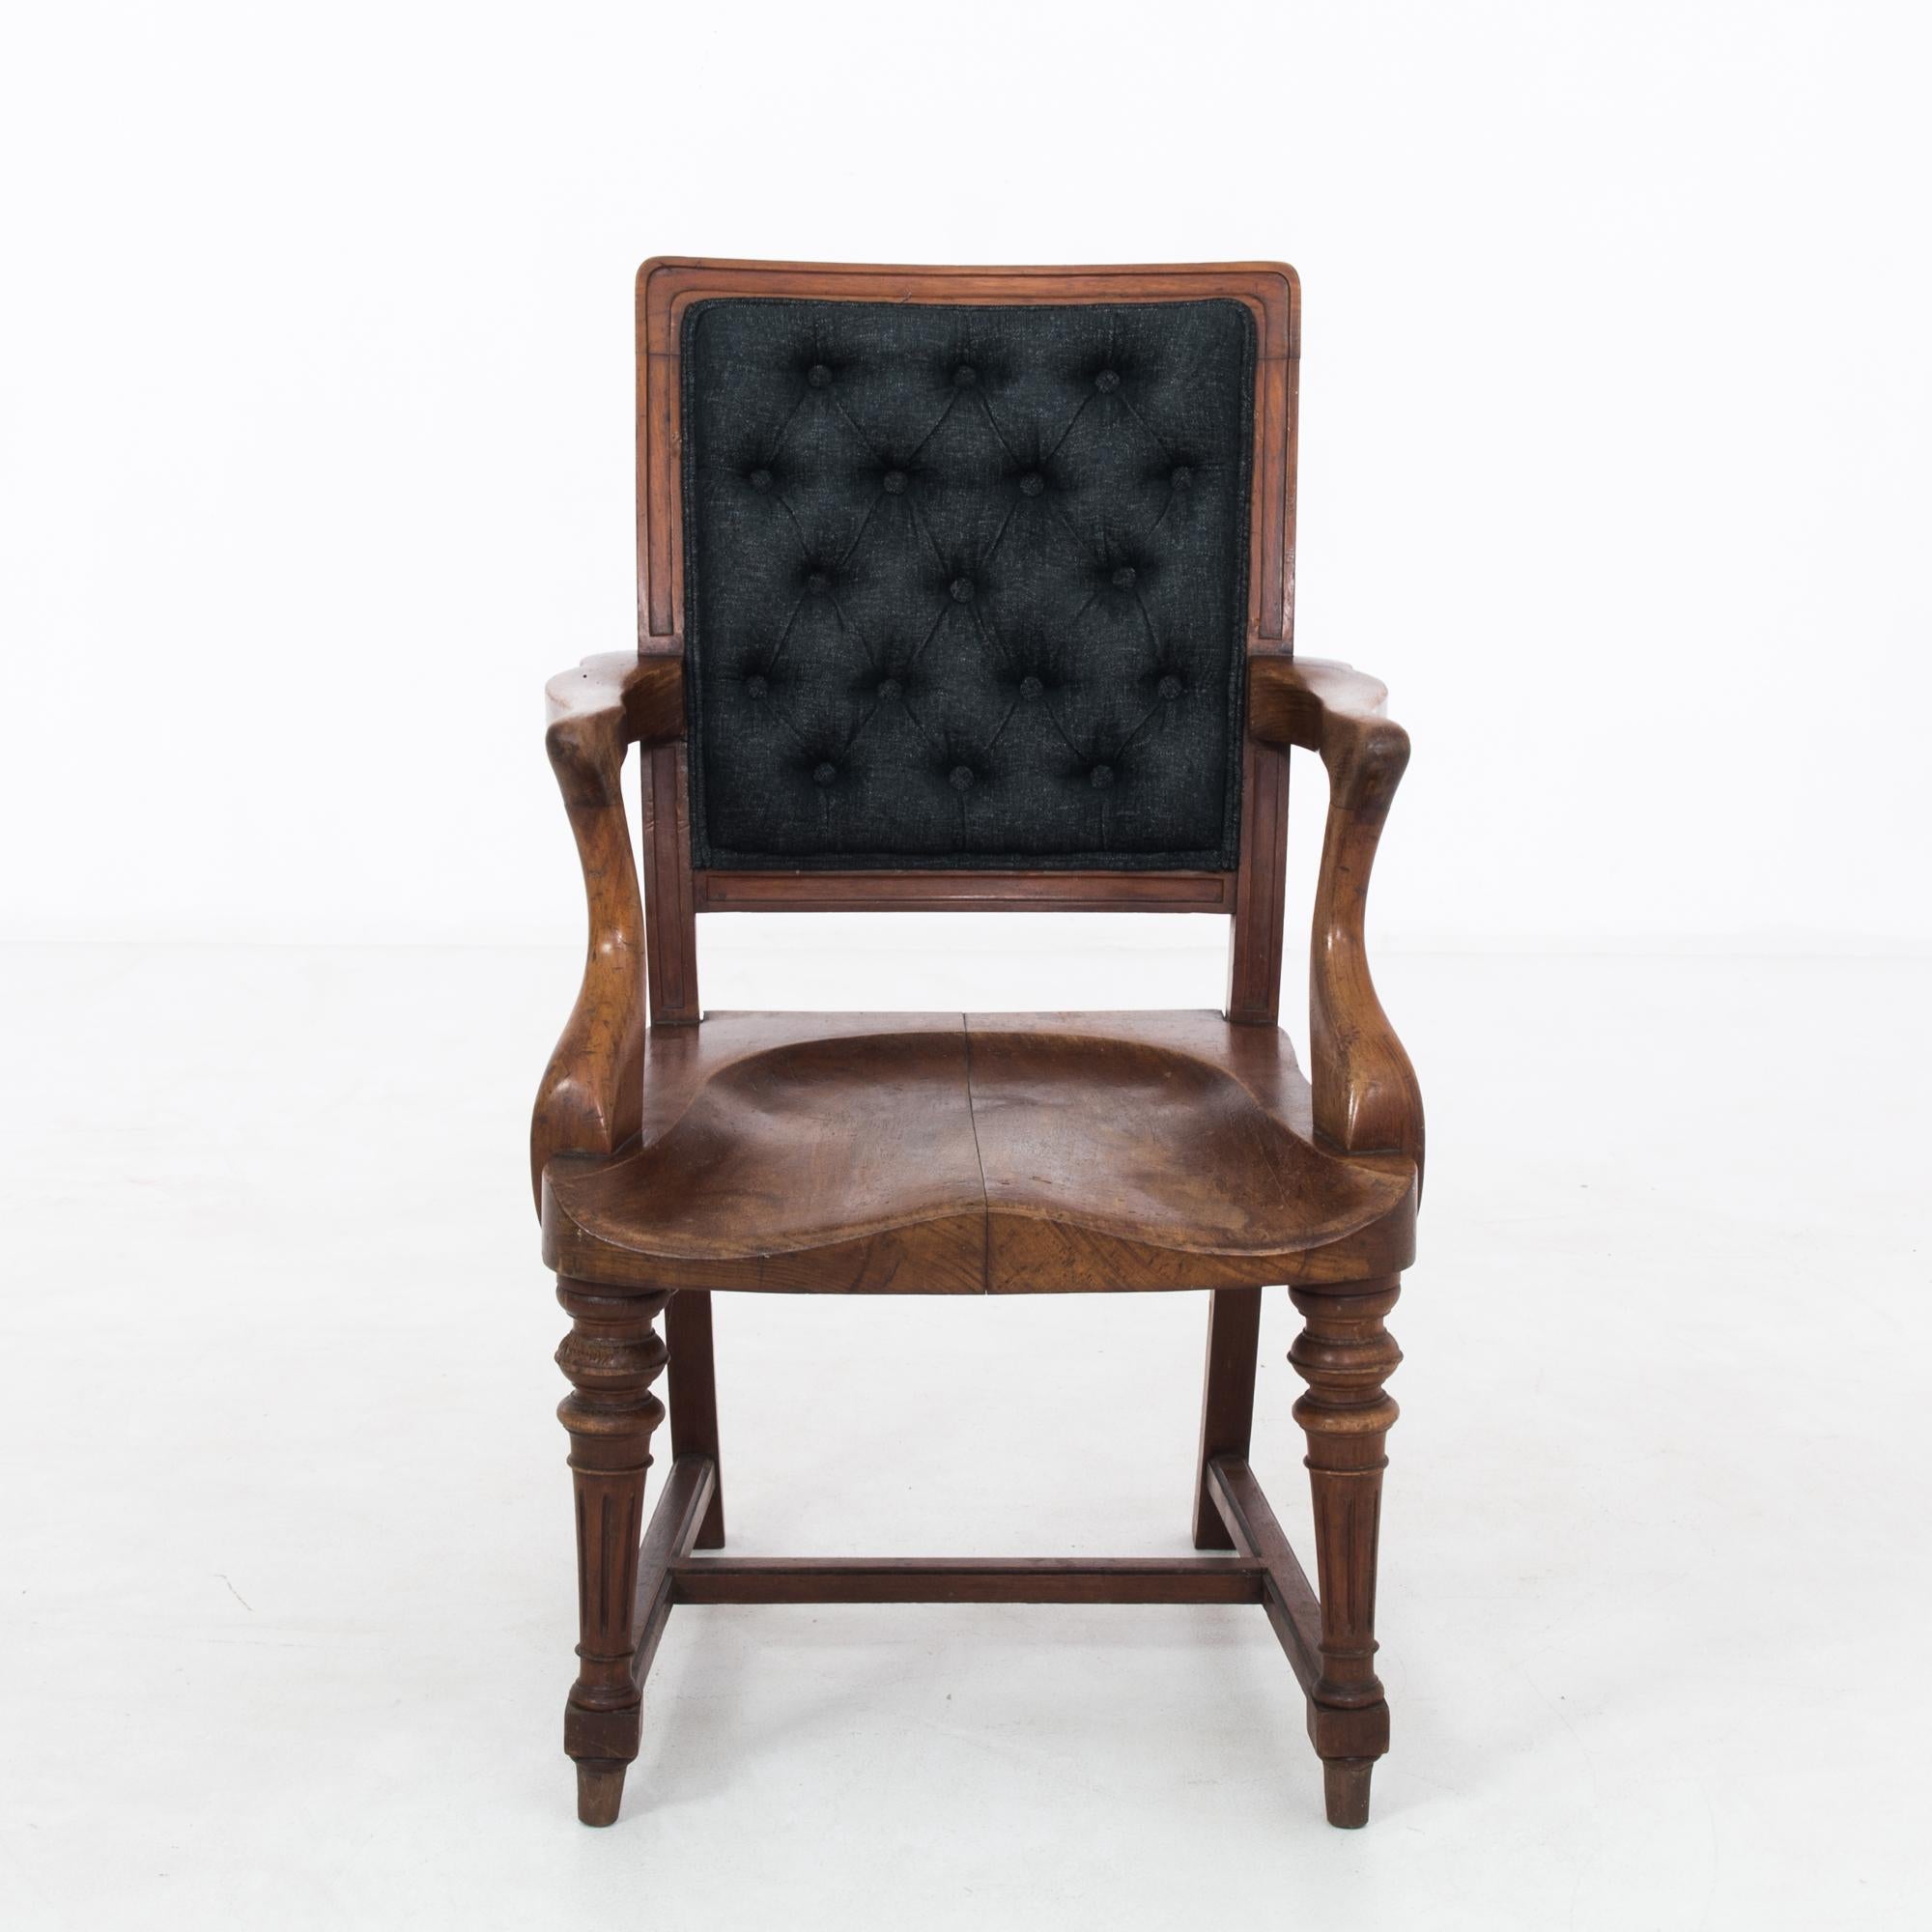 An antique wooden armchair with upholstered back from the United Kingdom, produced circa 1900. A piece clearly influenced by the popular Art Nouveau style that spread across the globe at the turn of the twentieth century, seen in the muted whiplash